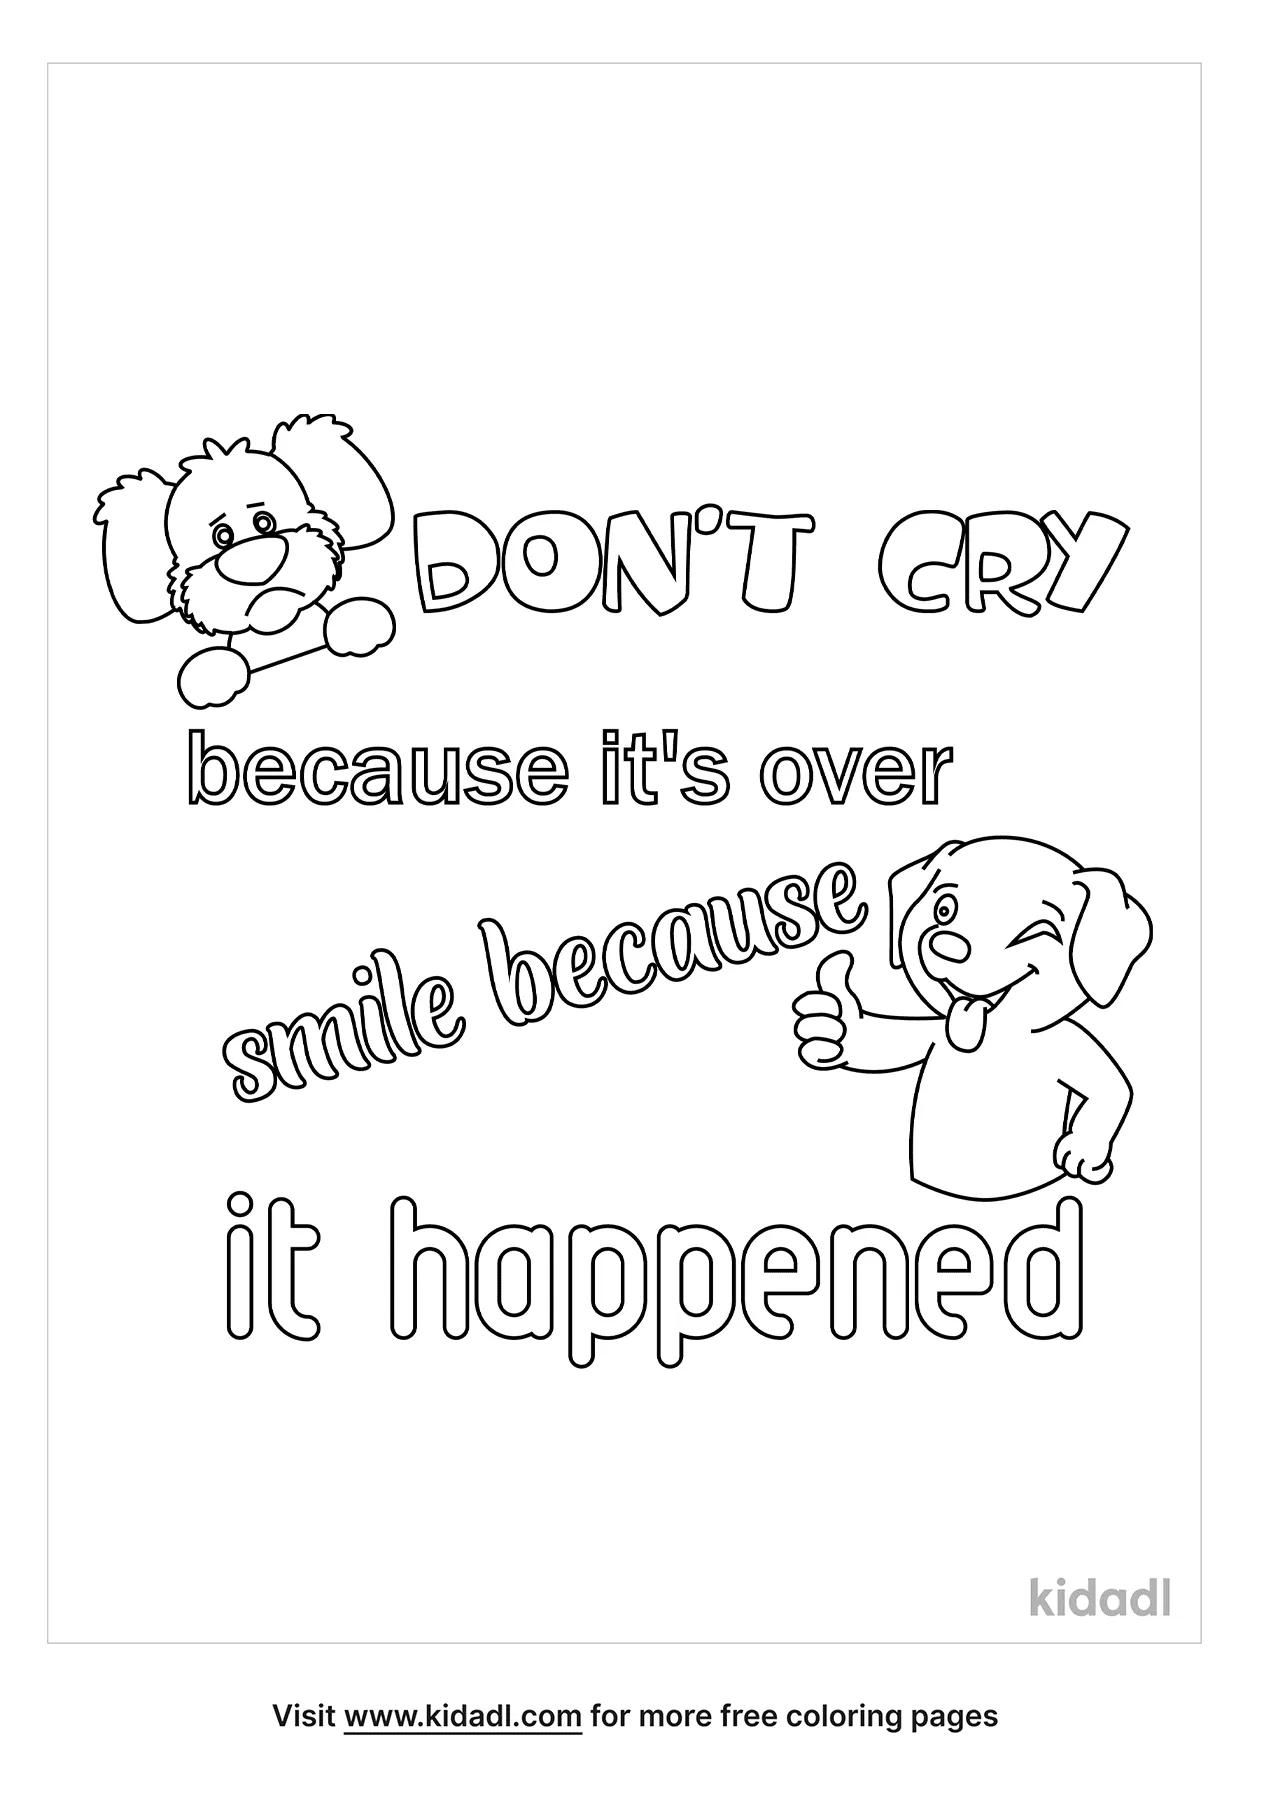 Don't Cry Because It's Over Smile Because It Happened Coloring Page